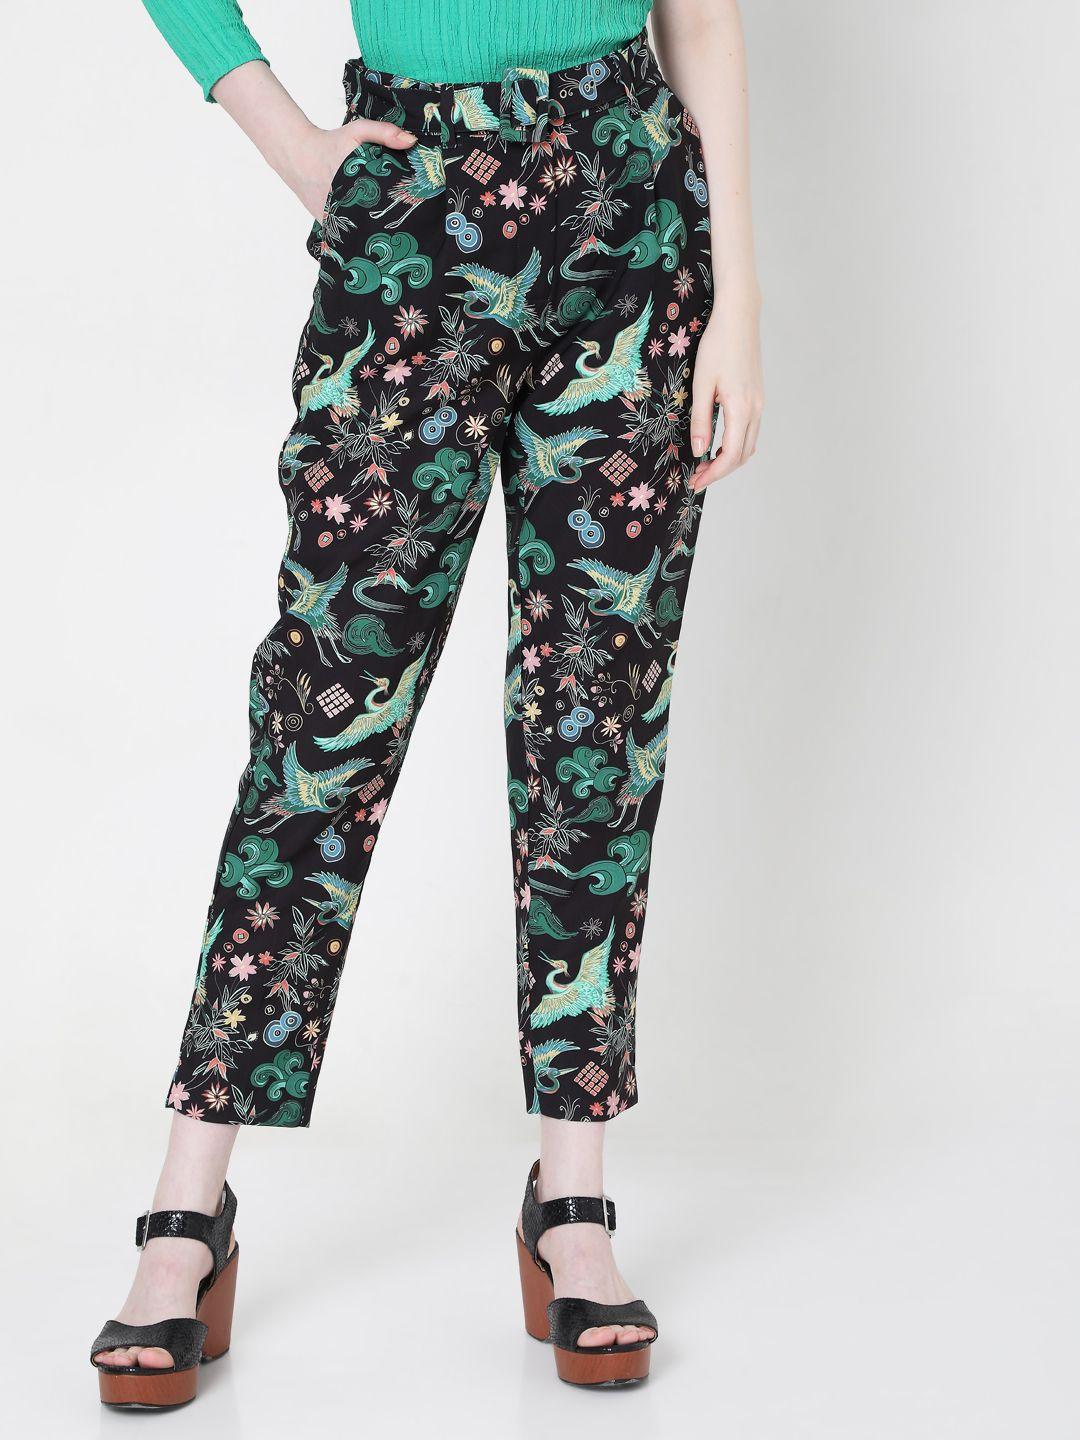 vero moda women black floral printed slim fit high-rise pleated trousers